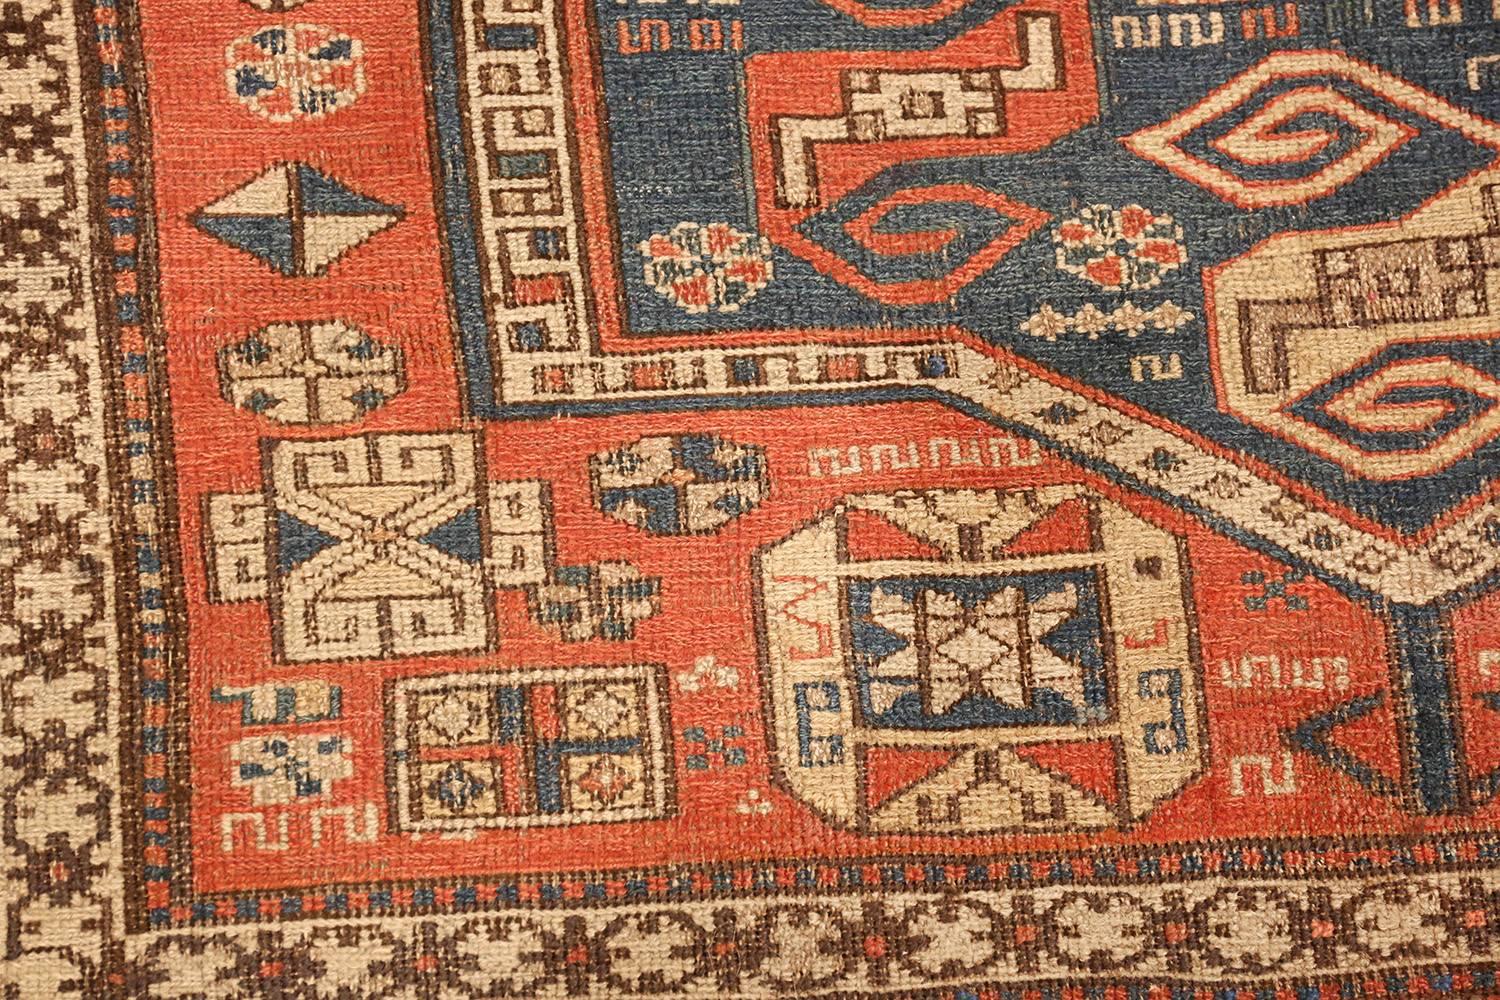 Hand-Woven Small Antique Tribal Soumak Caucasian Rug. Size: 4 ft 4 in x 6 ft 5 in 